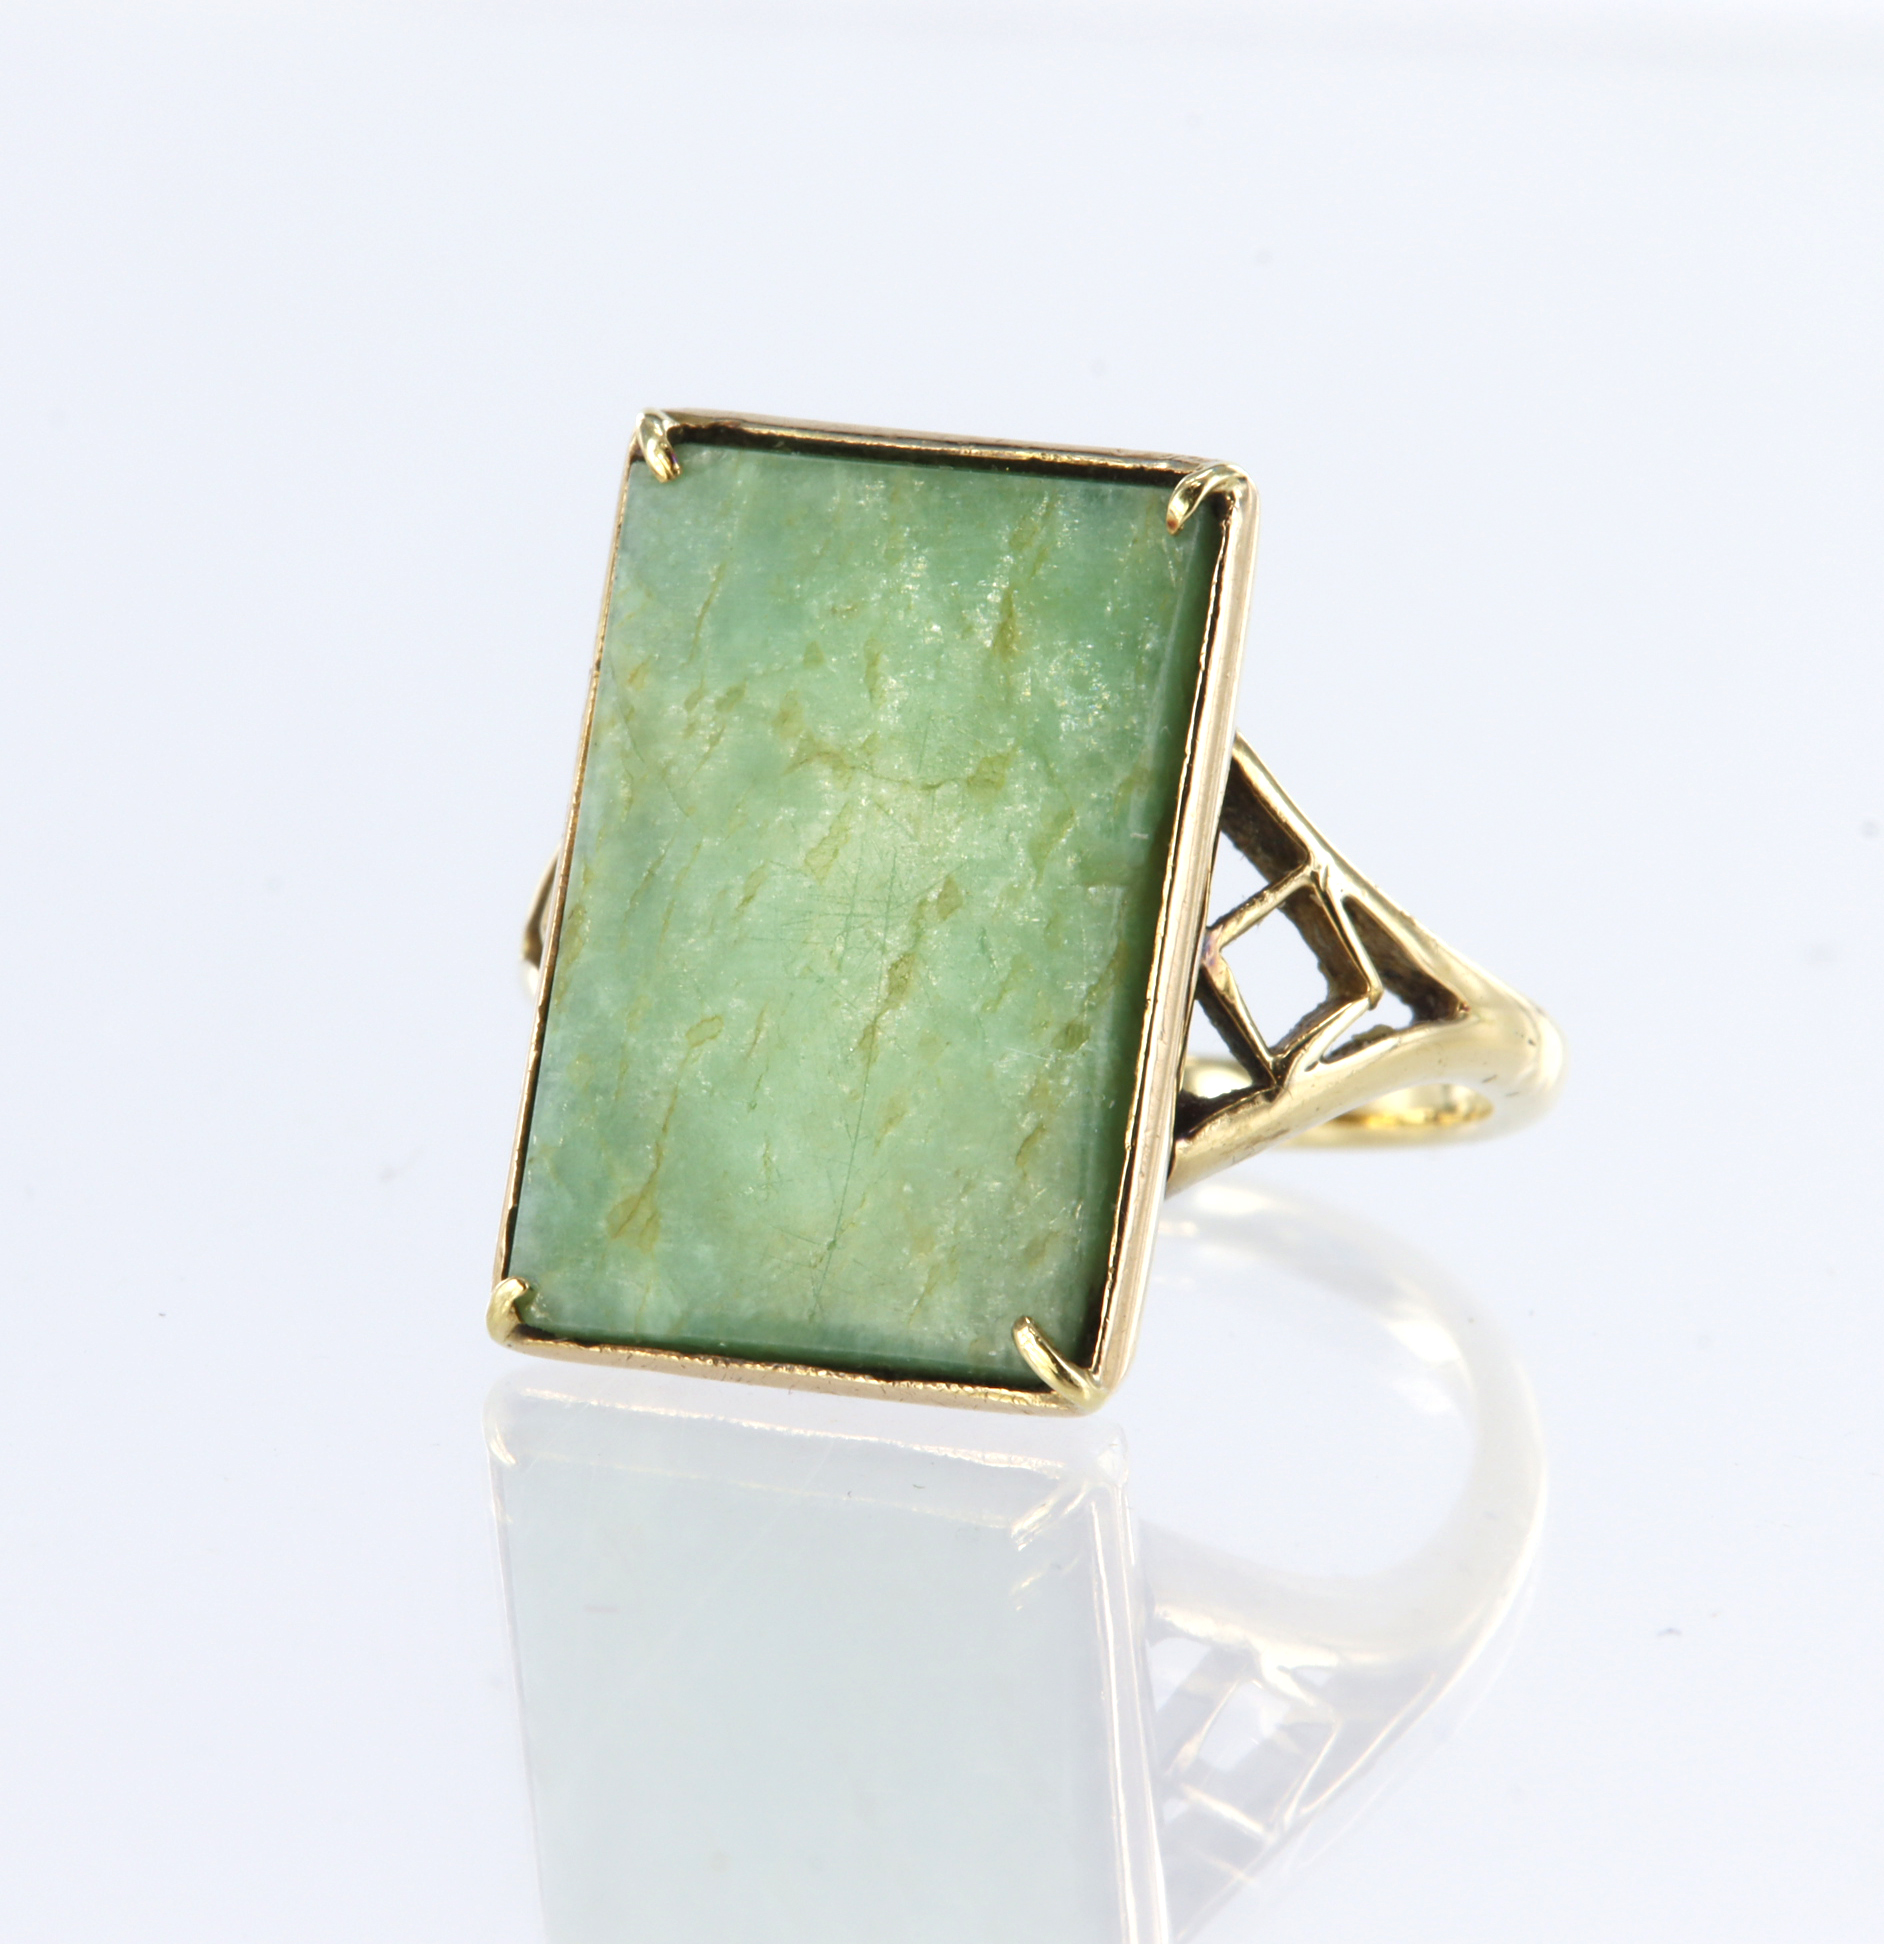 18ct yellow gold dress ring set with a rectangular green hardstone measuring approx. 19mm x 13mm, in